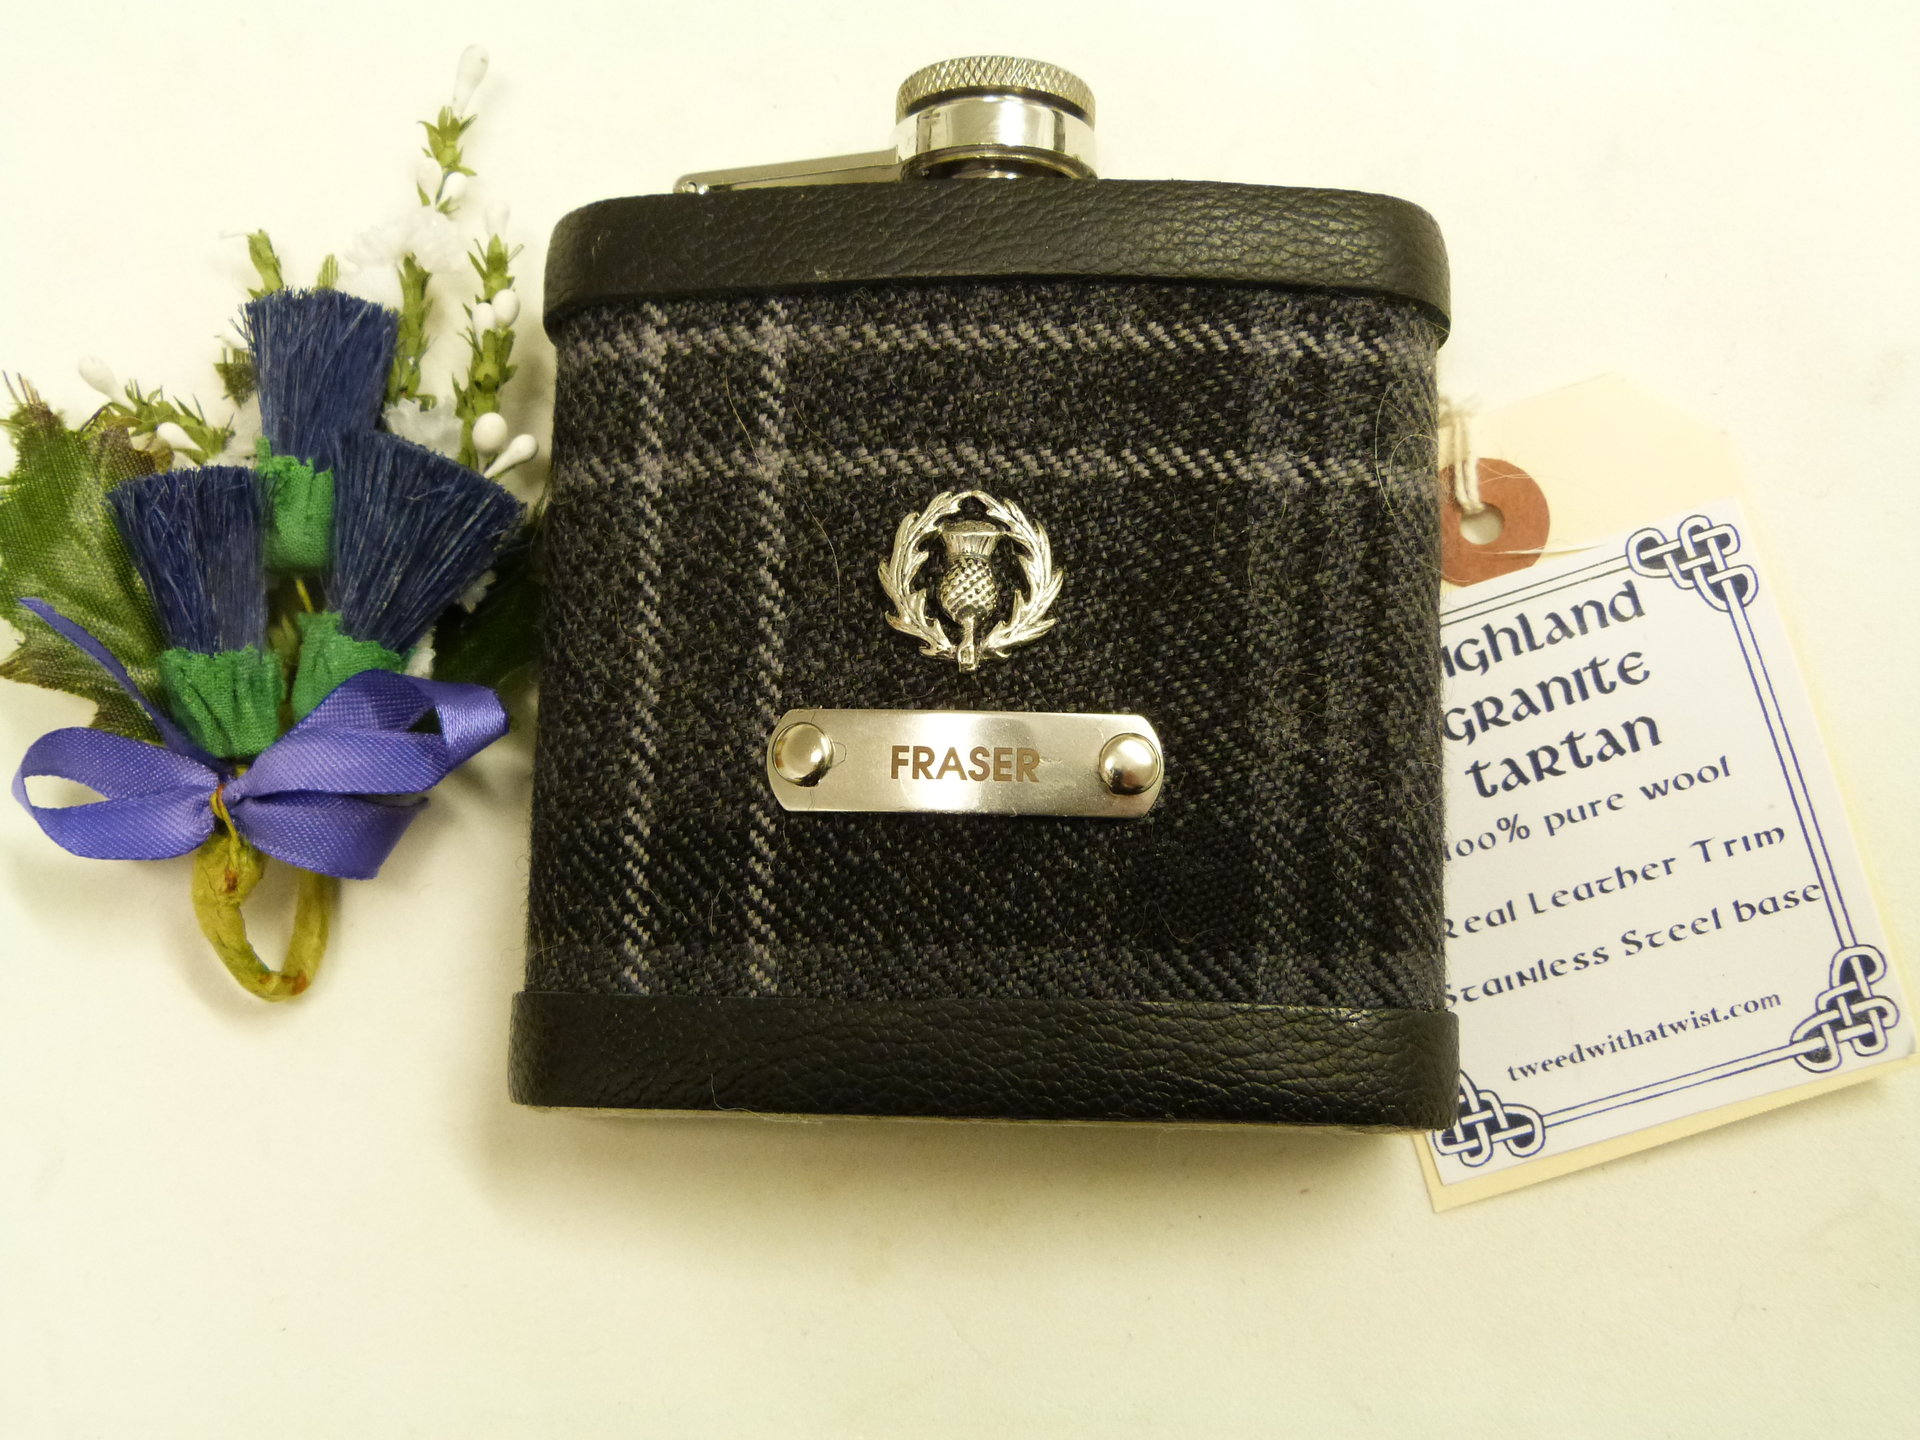 Your family or clan Tartan hip flask with thistle and custom engraved stainless steel tag with any name, date, motto etc.